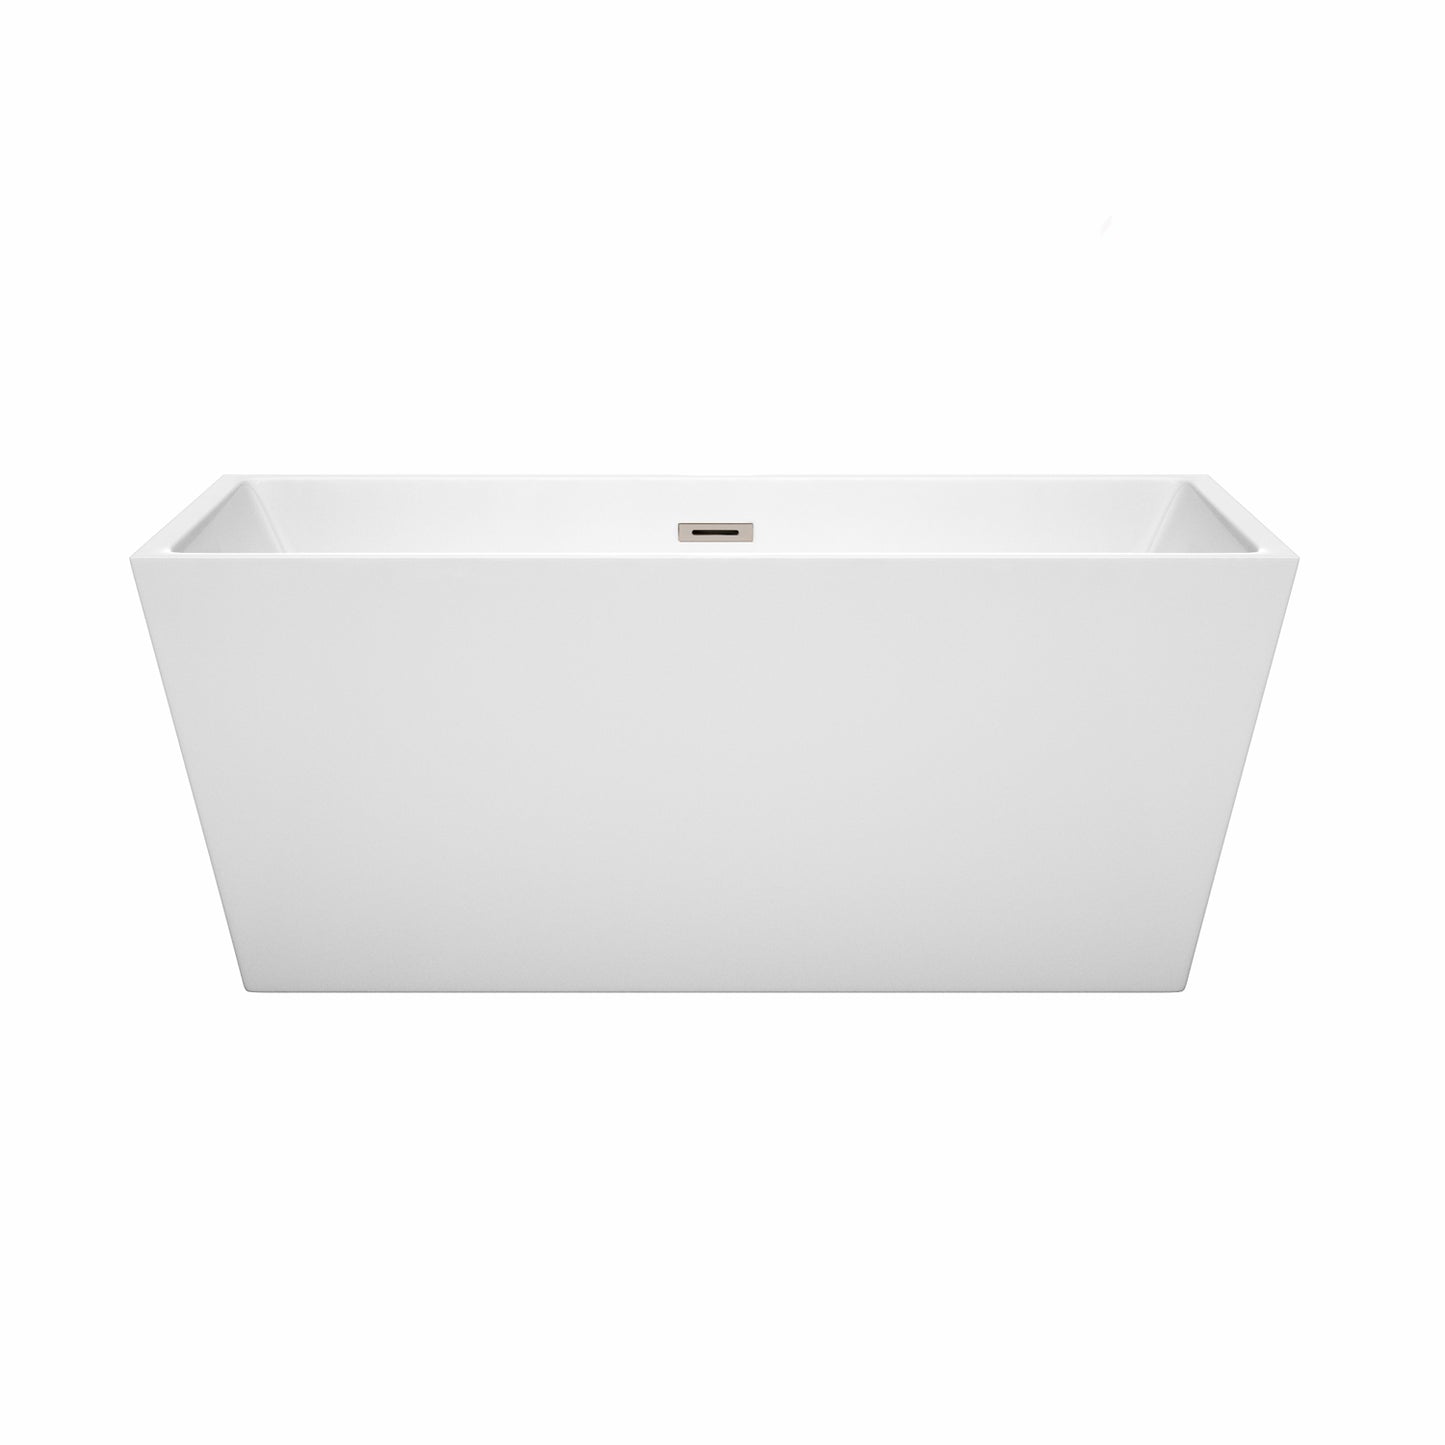 Wyndham Collection Sara 59 Inch Freestanding Bathtub in White with Brushed Nickel Drain and Overflow Trim - Luxe Bathroom Vanities